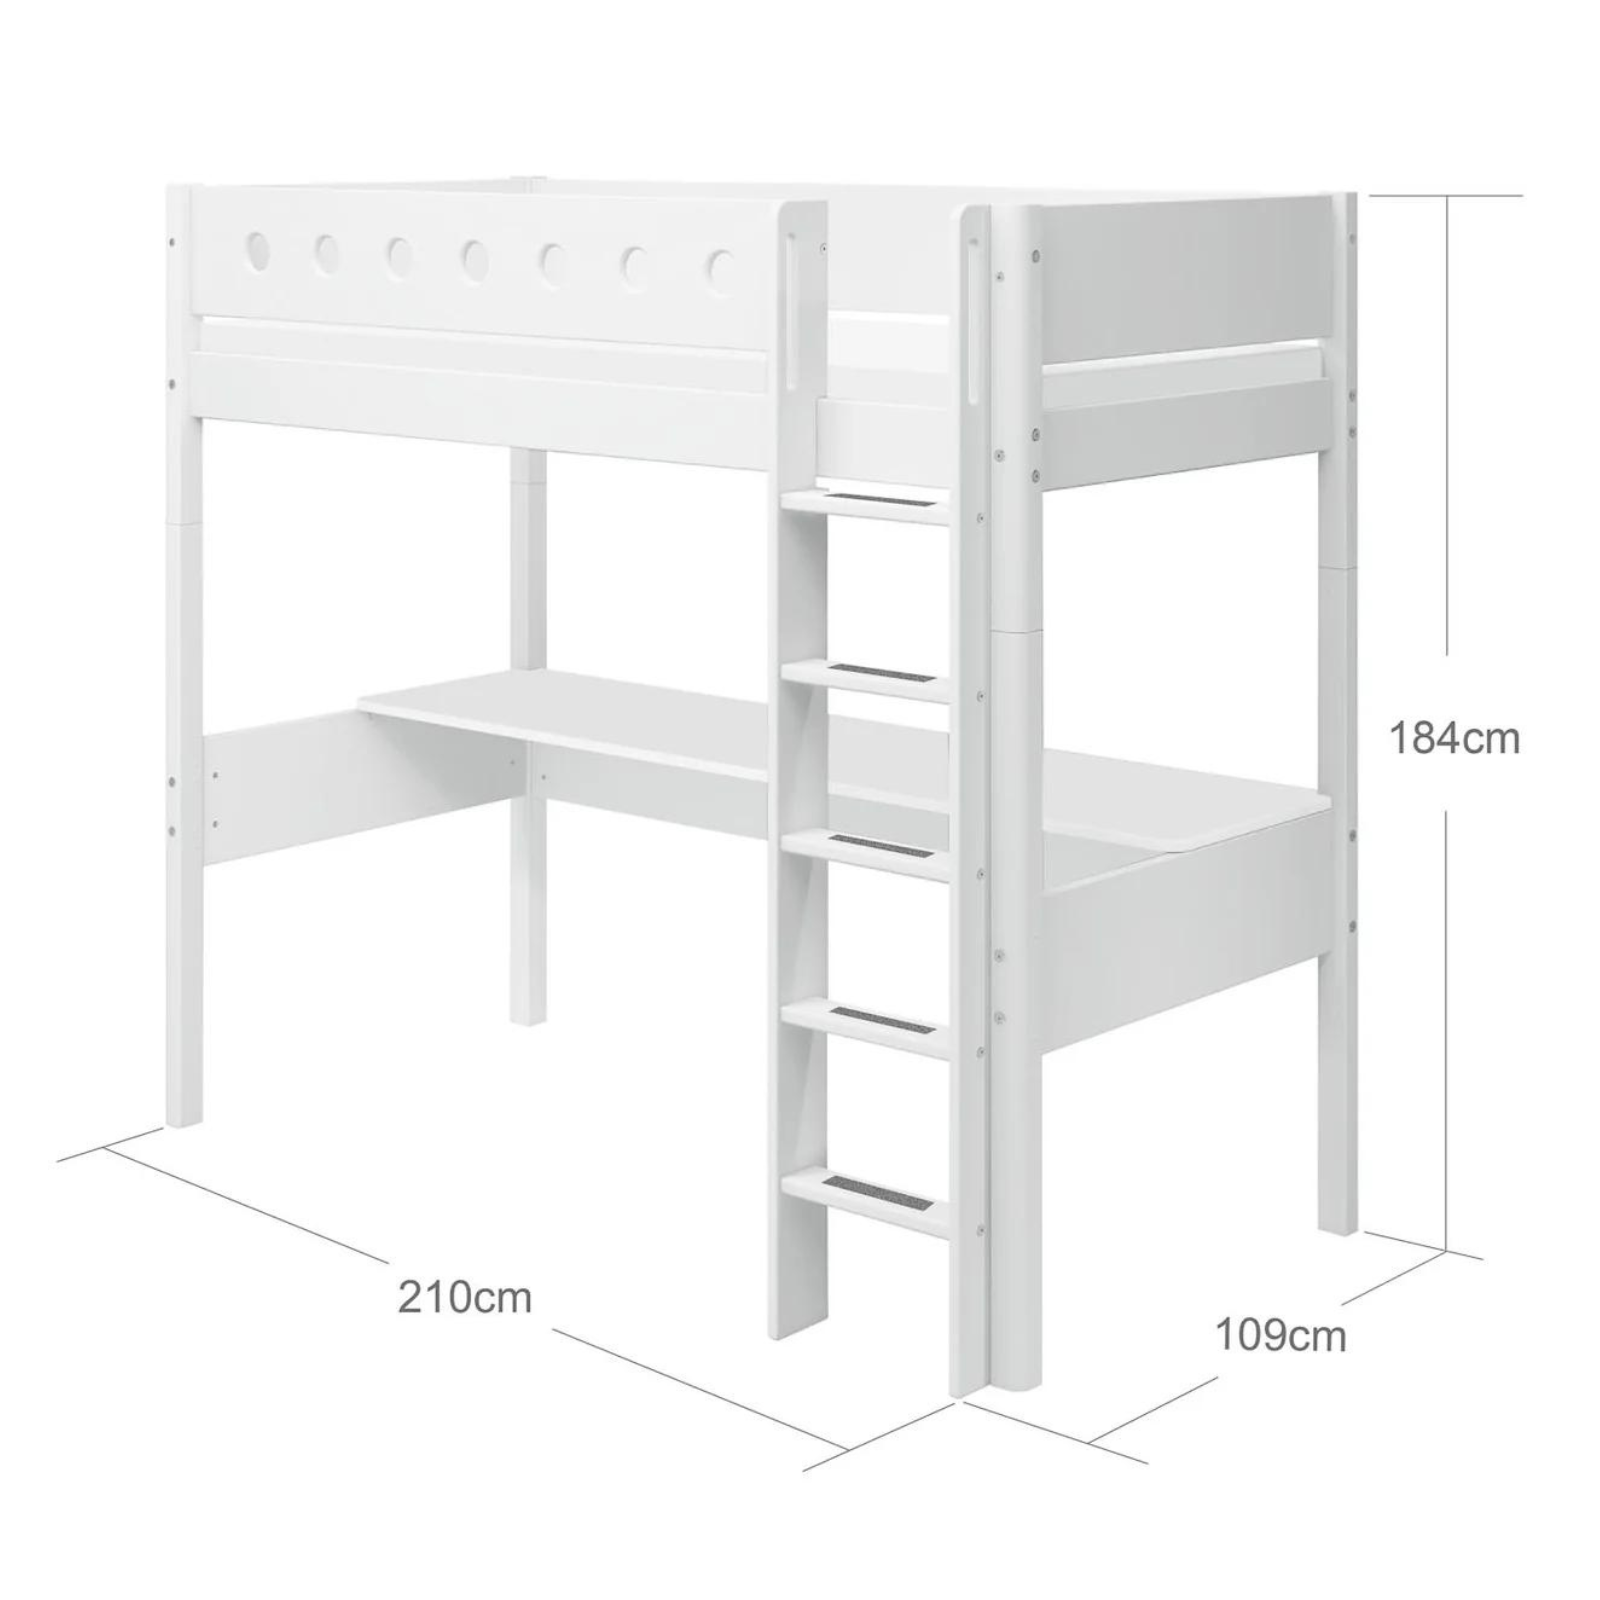 High bed w. straight ladder and desk dimensions